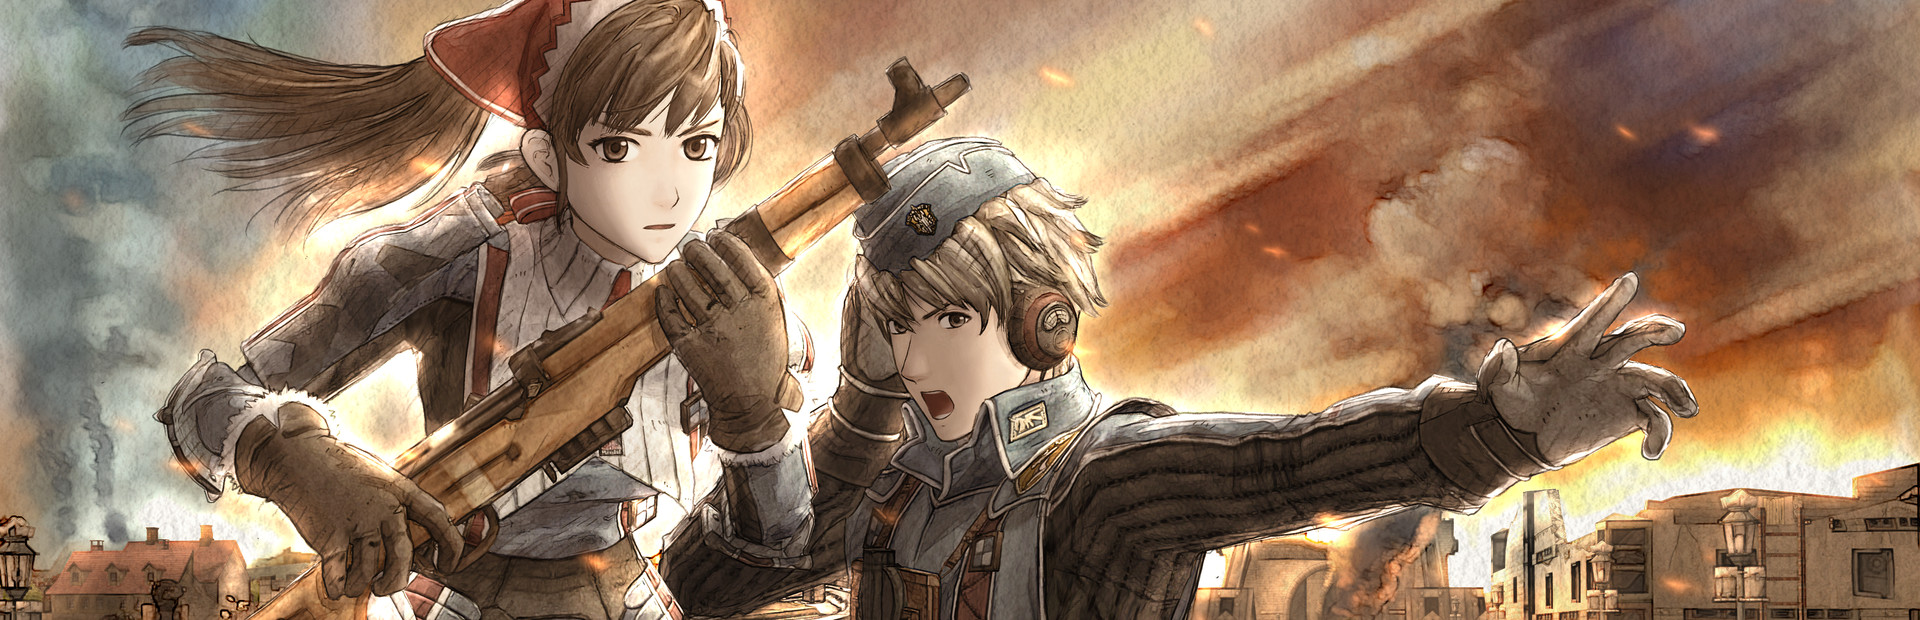 Valkyria Chronicles™ cover image